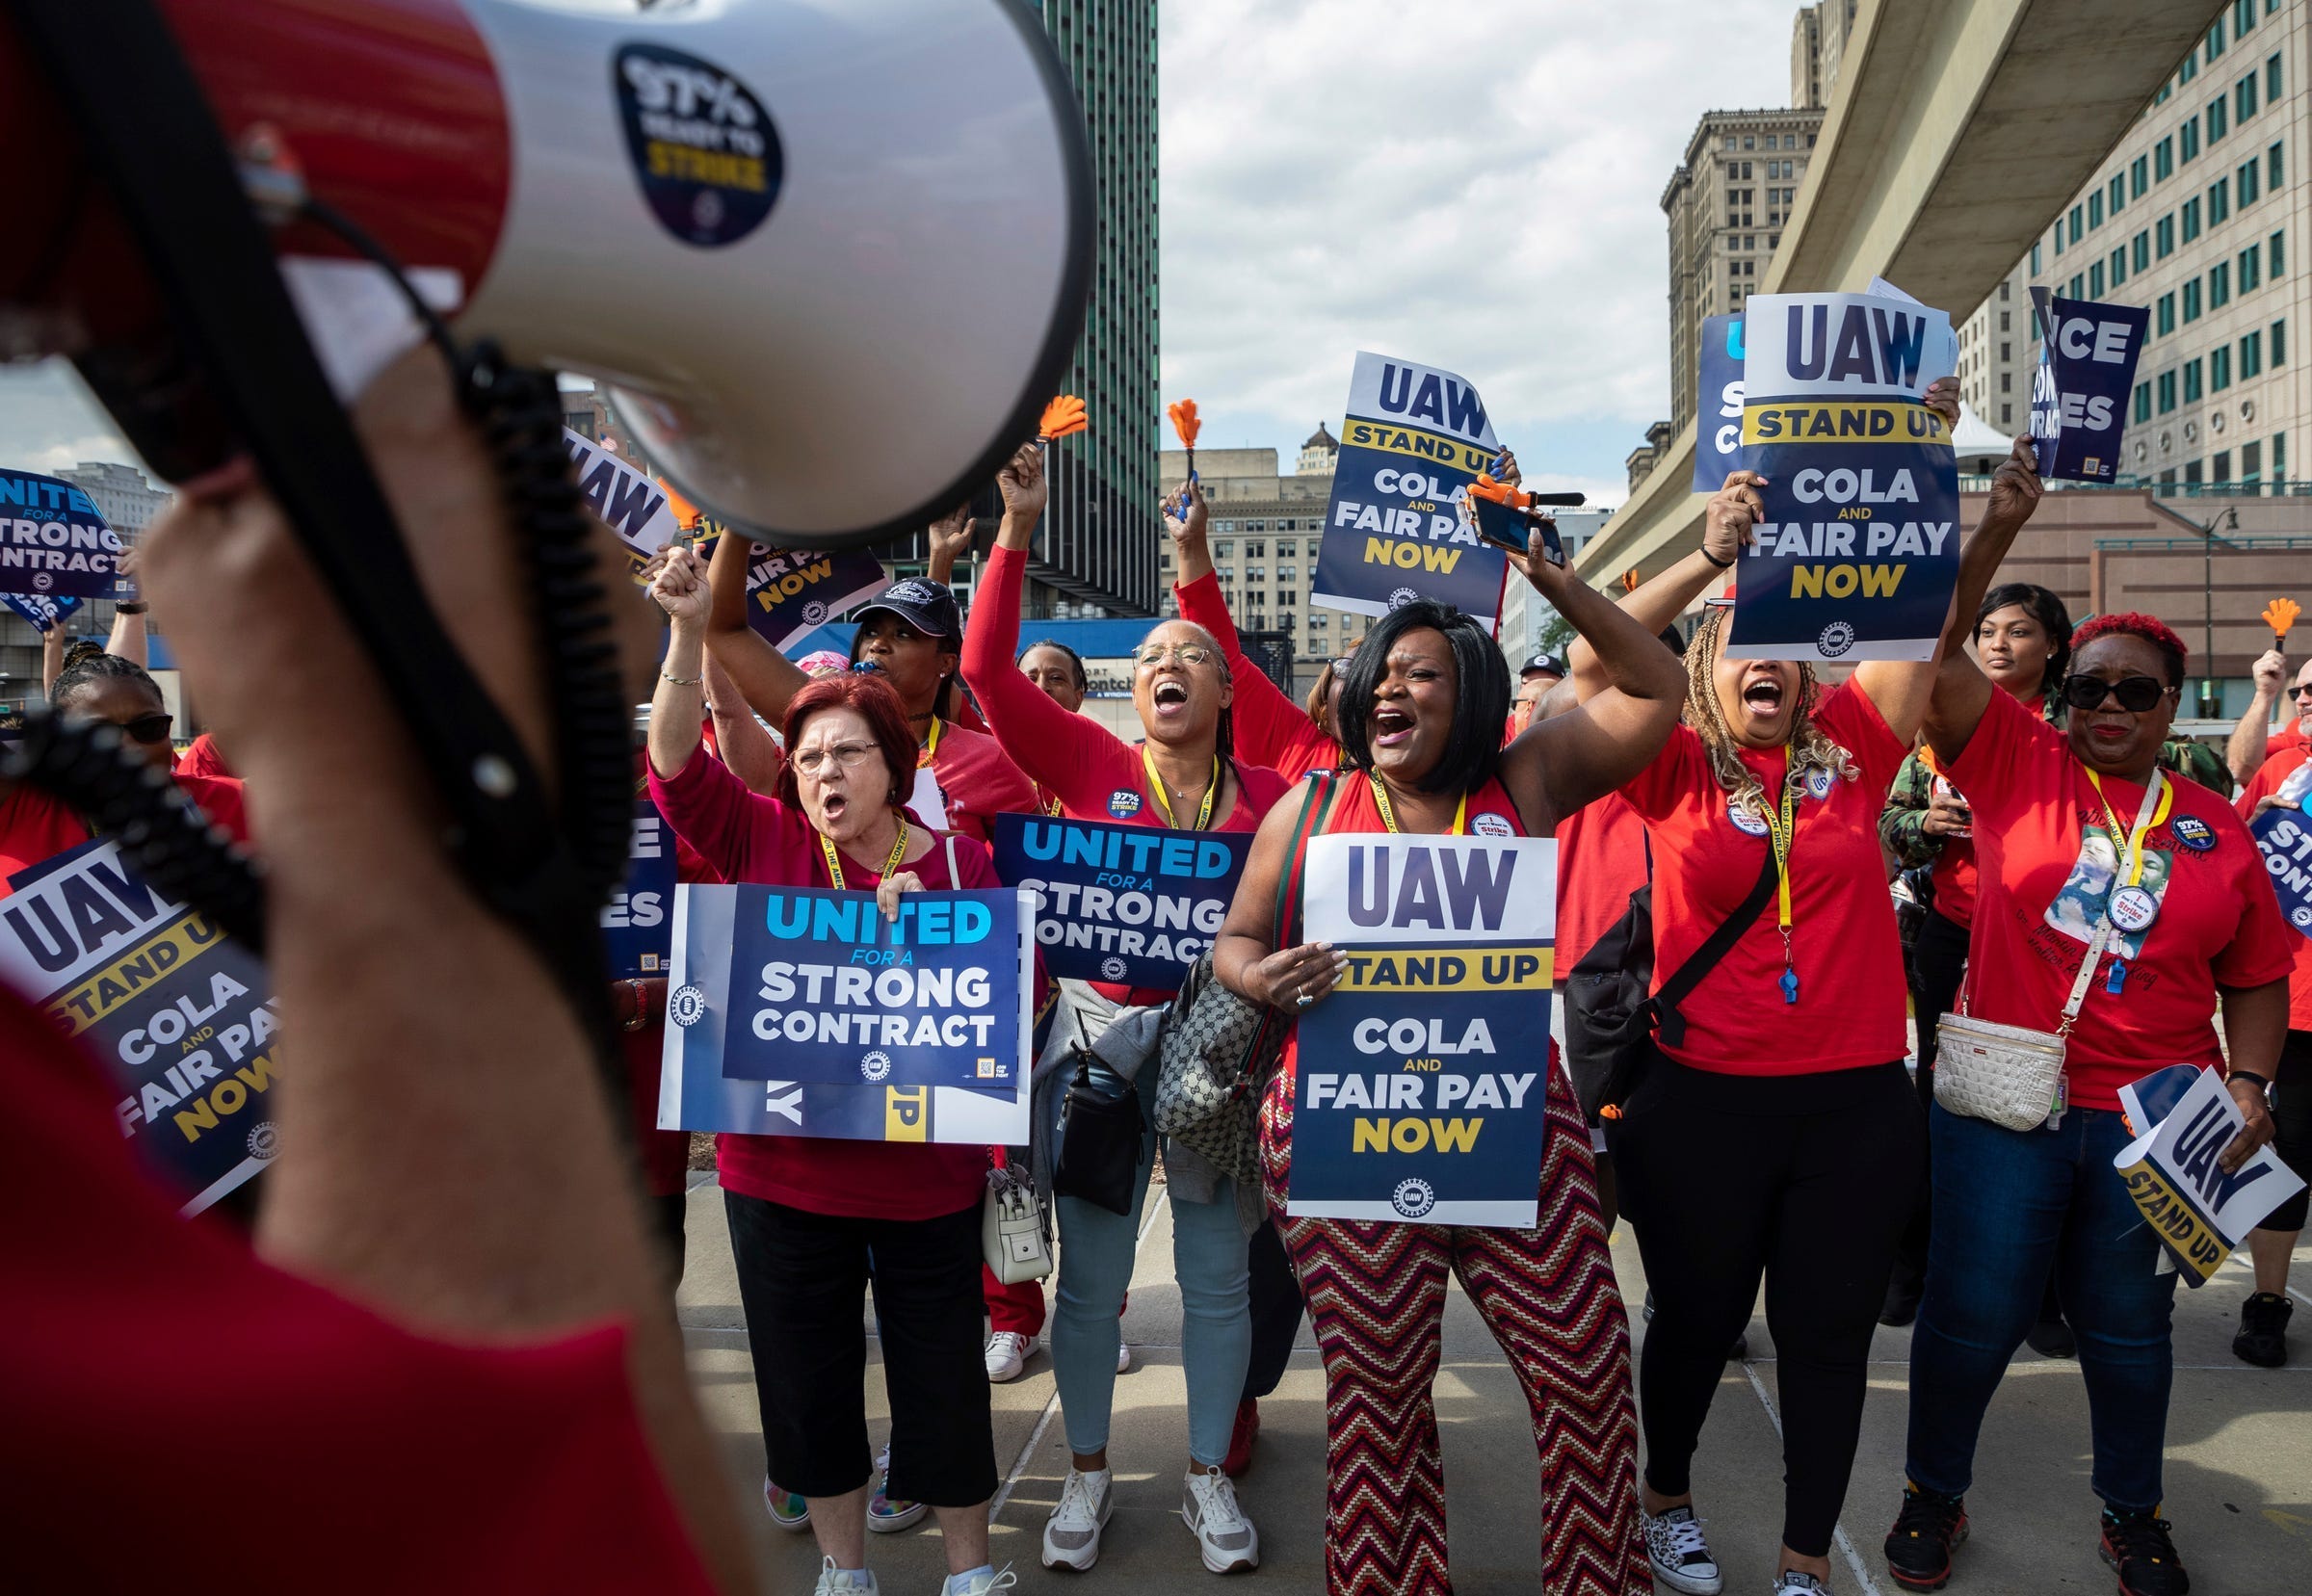 the 4-day workweek is among the uaw's strike demands: why some say it's a good idea